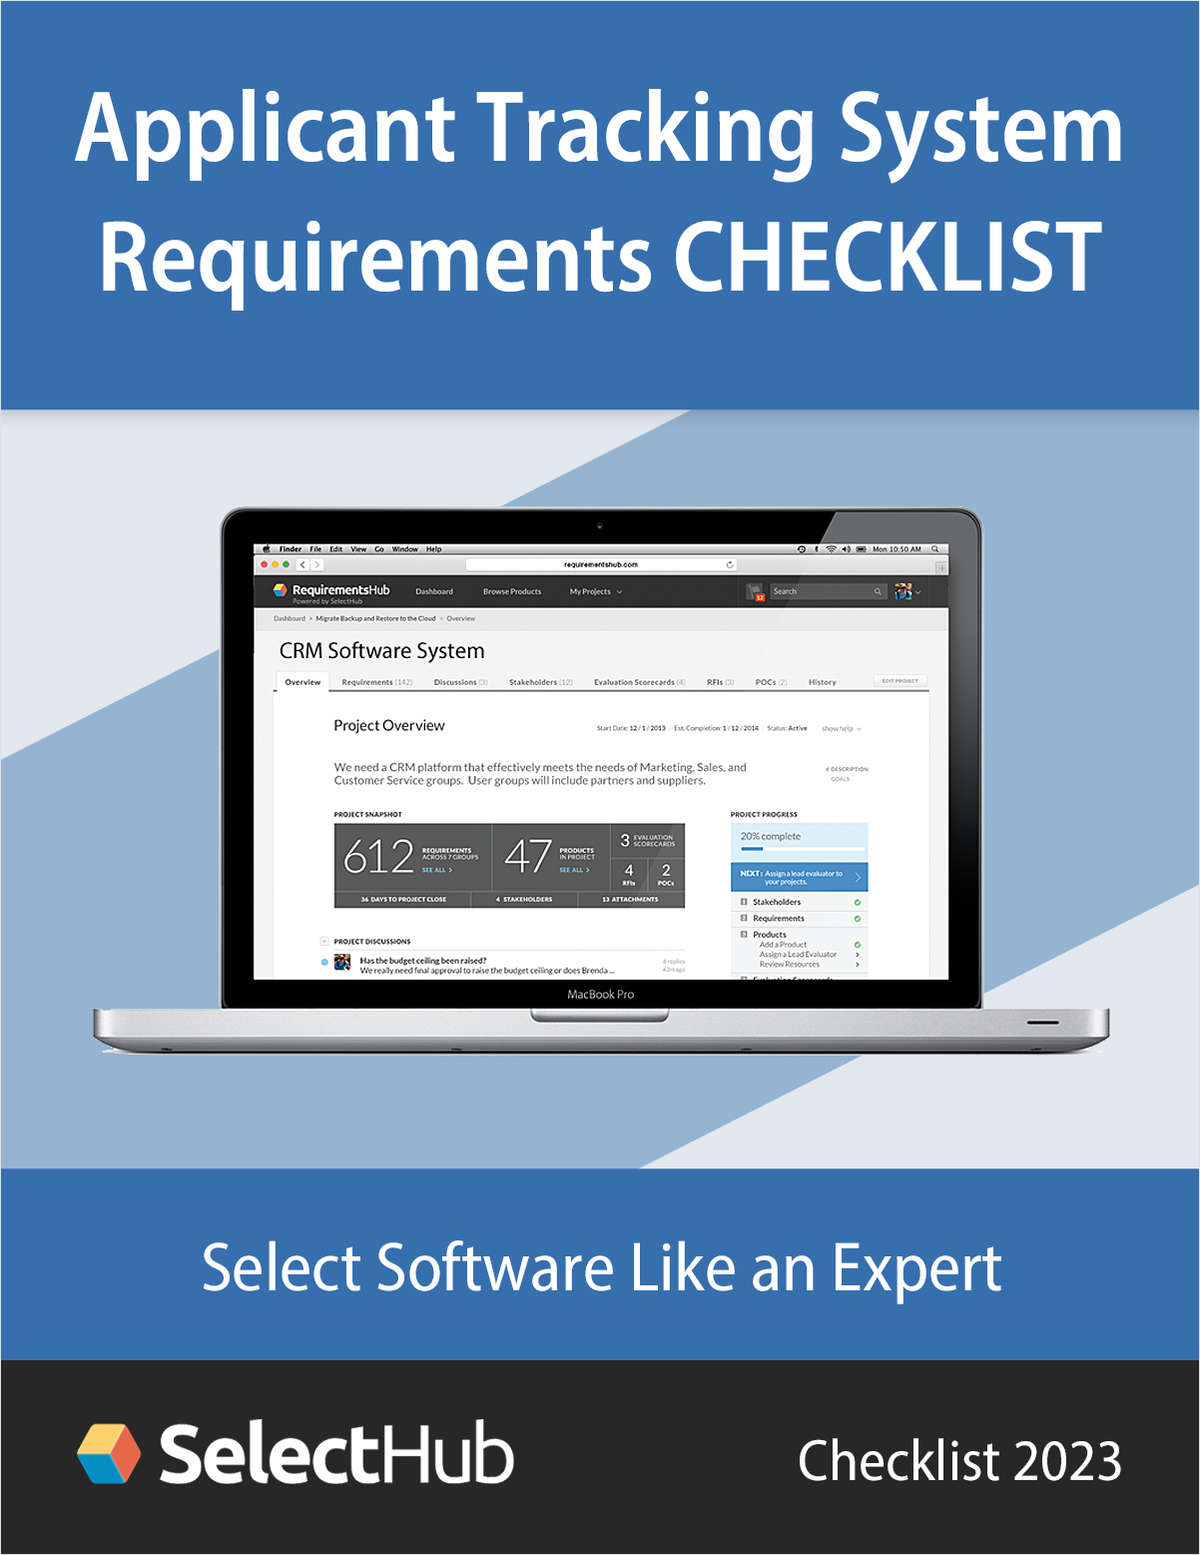 Applicant Tracking System (ATS) Requirements Checklist for 2023